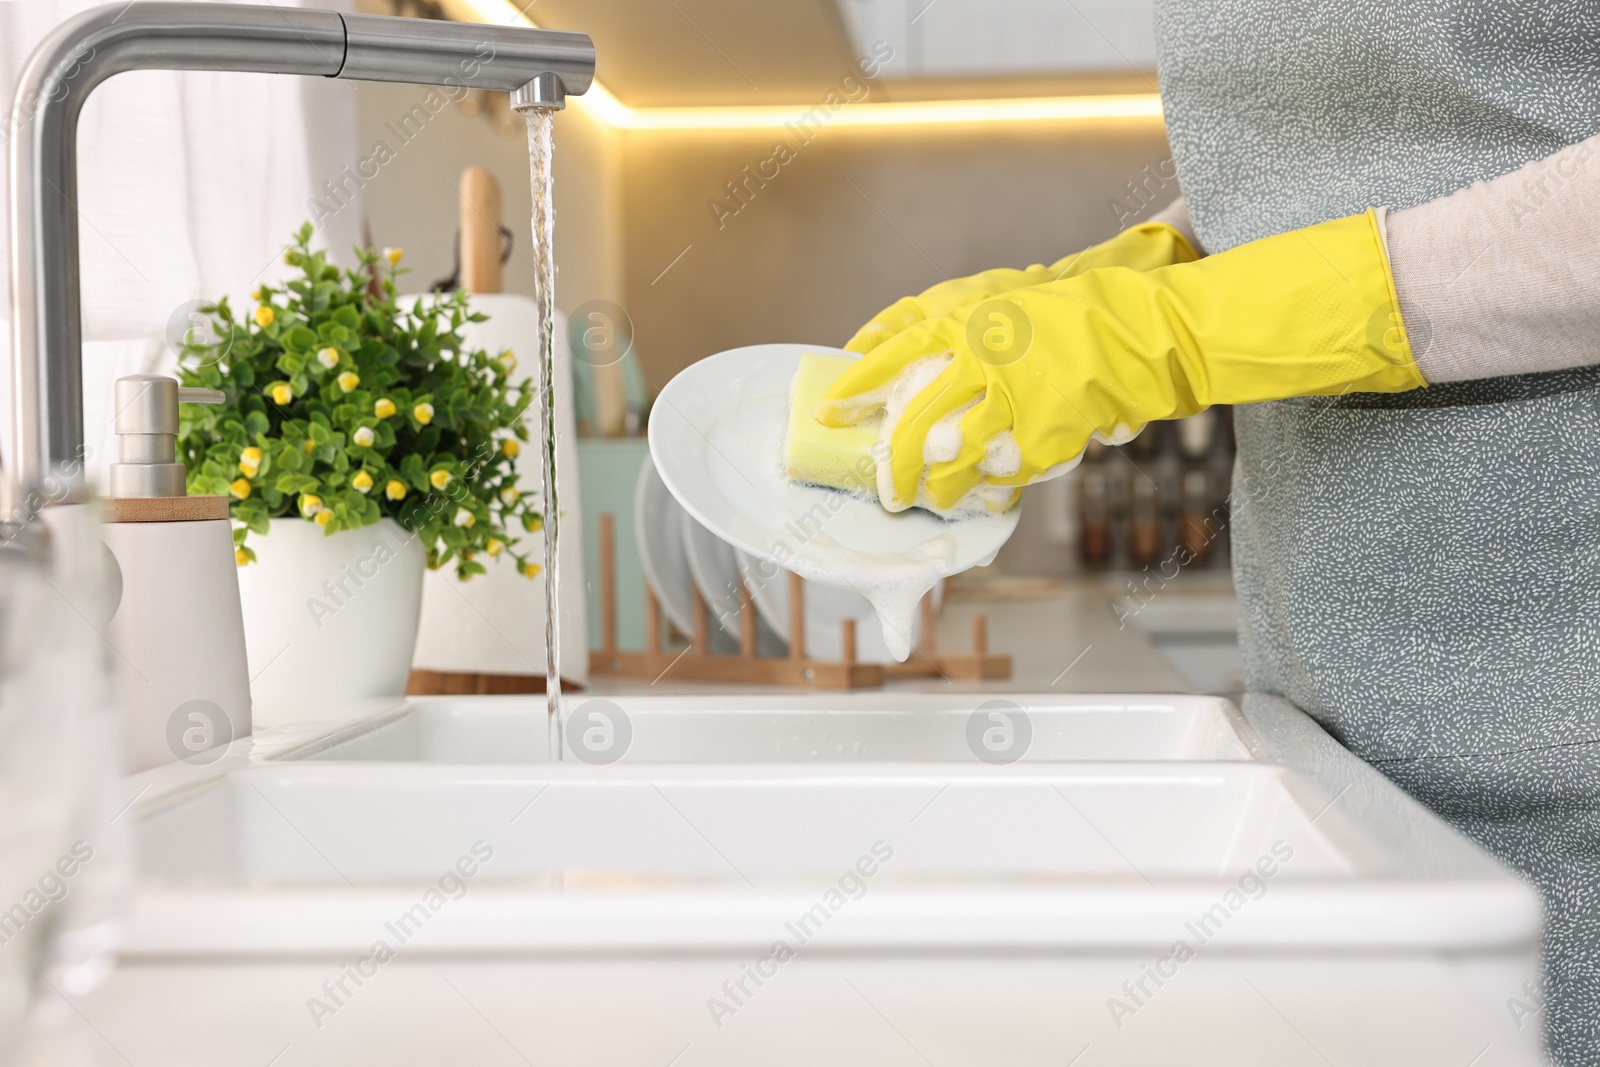 Photo of Housewife washing plate in kitchen sink, closeup